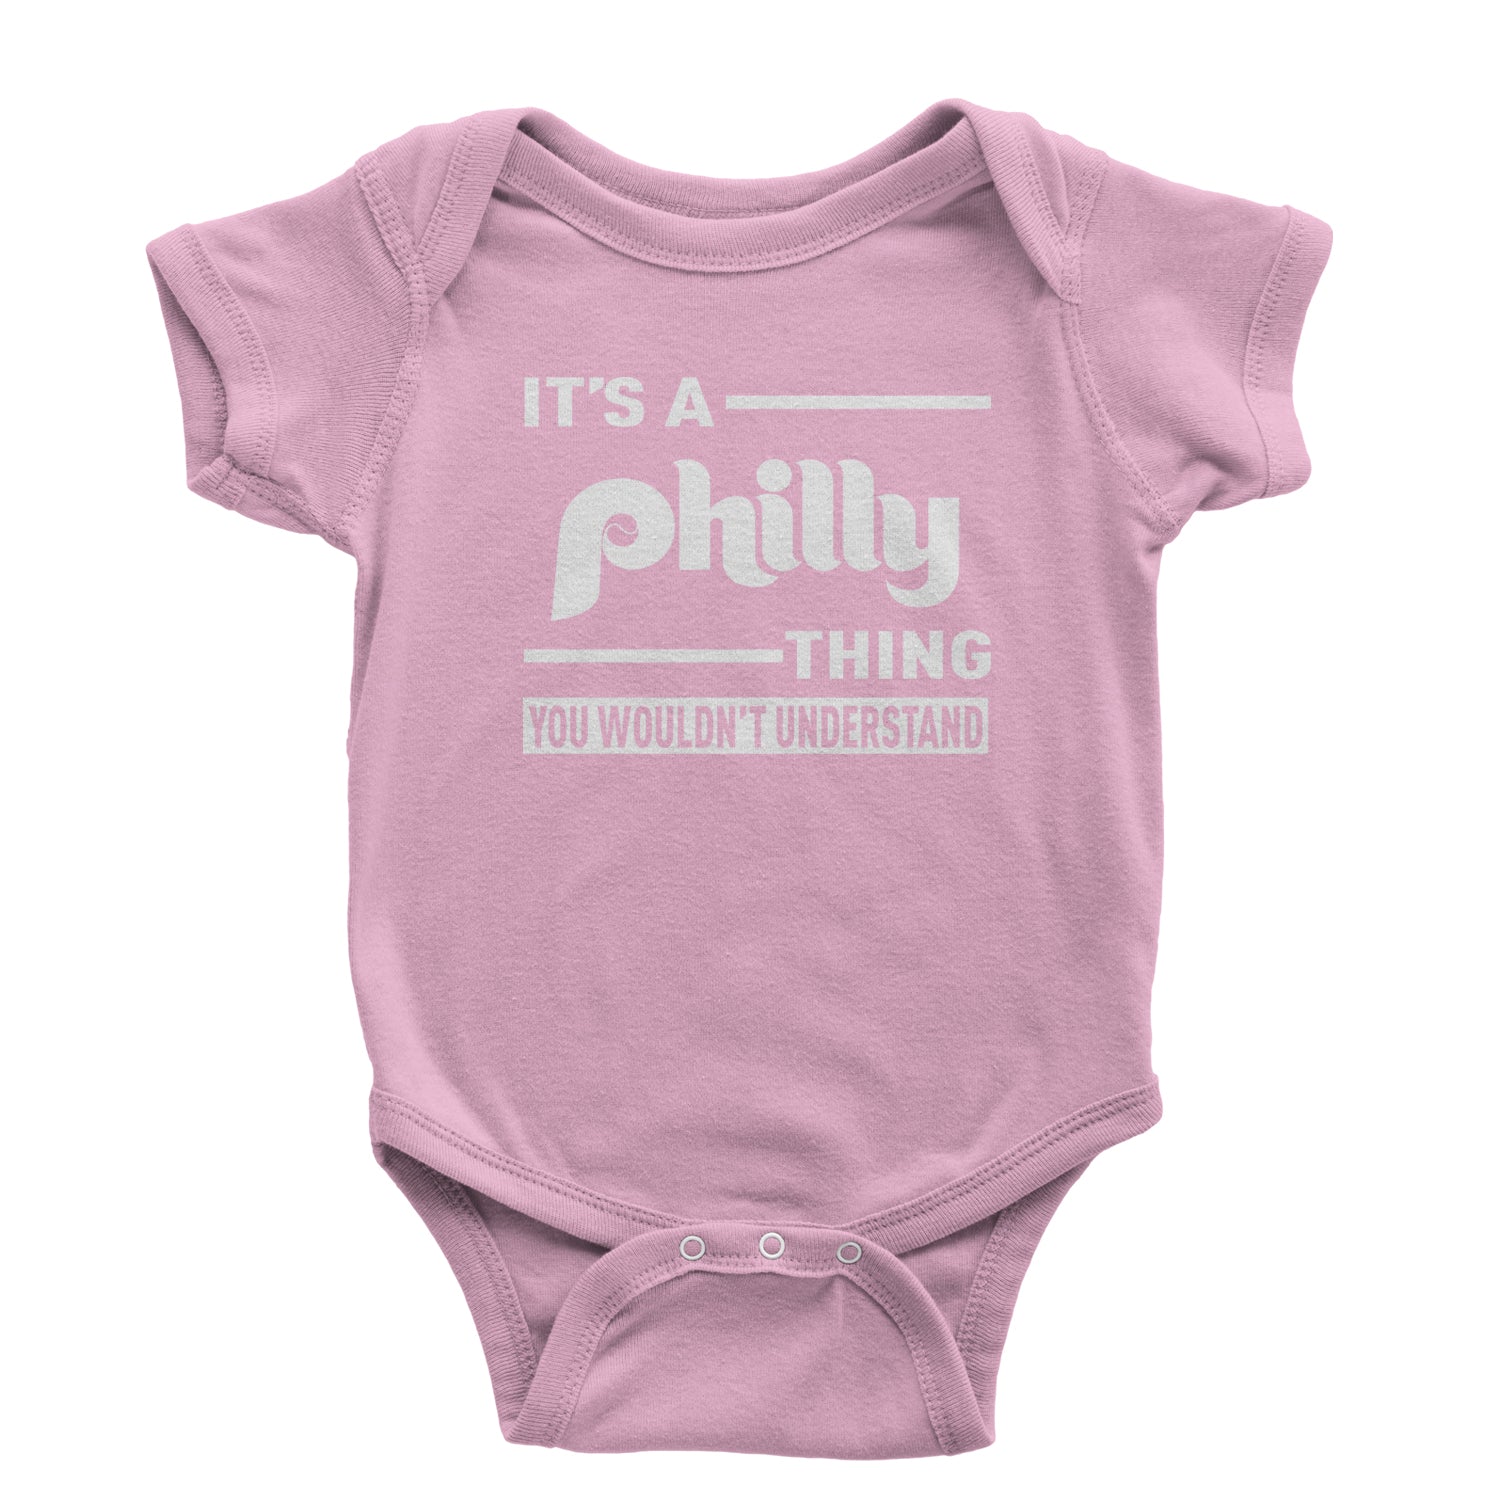 It's A Philly Thing, You Wouldn't Understand Infant One-Piece Romper Bodysuit and Toddler T-shirt baseball, filly, football, jawn, morgan, Philadelphia, philli by Expression Tees